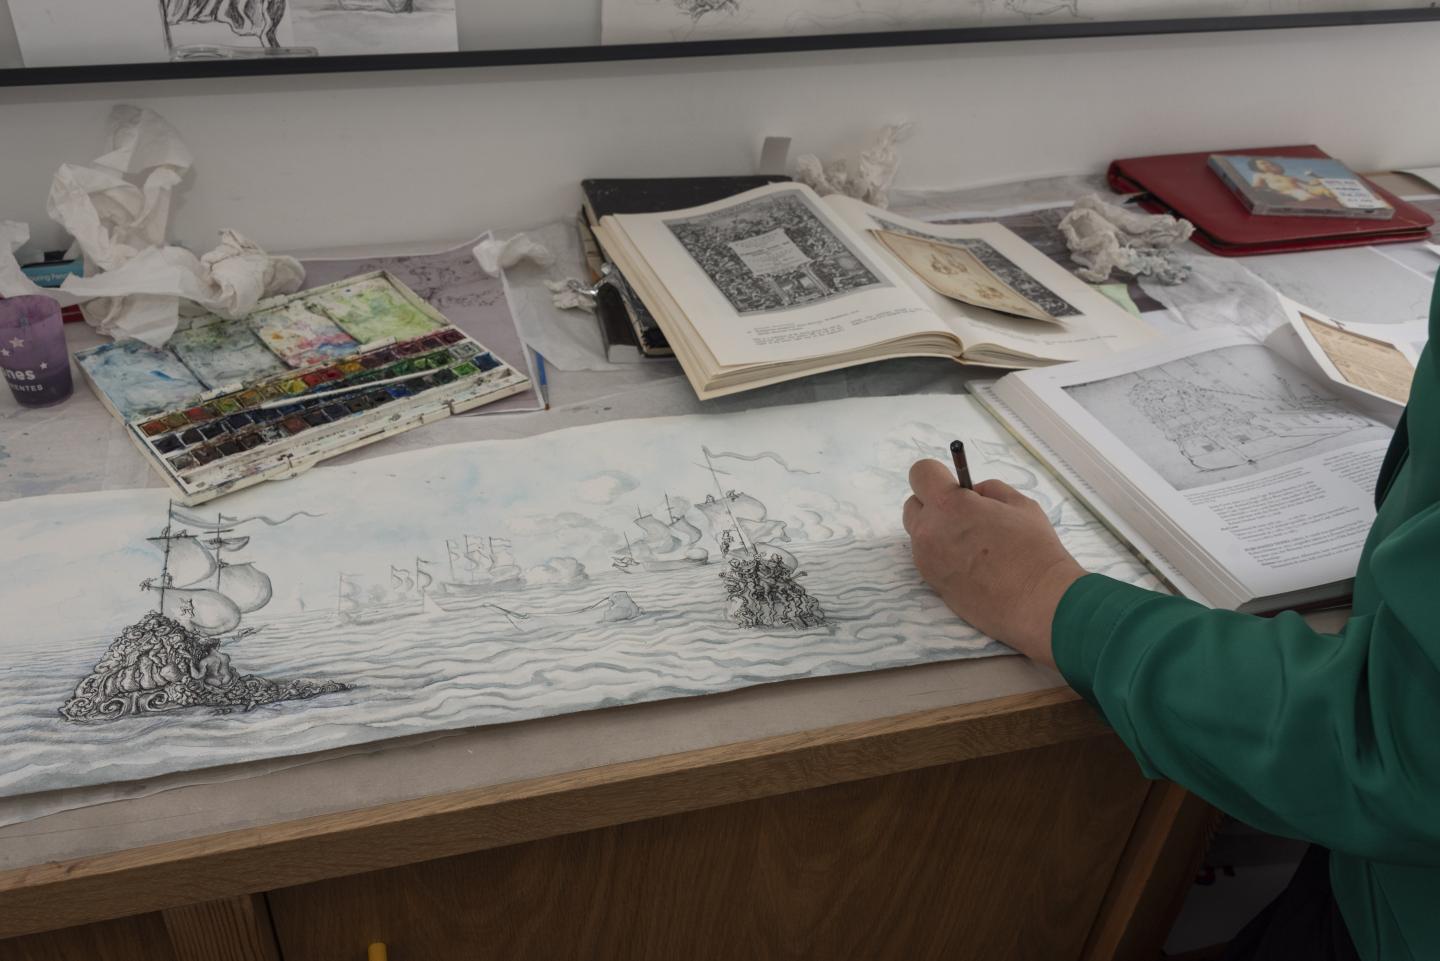 An artist sketches in a sketchbook surrounded by drawing materials